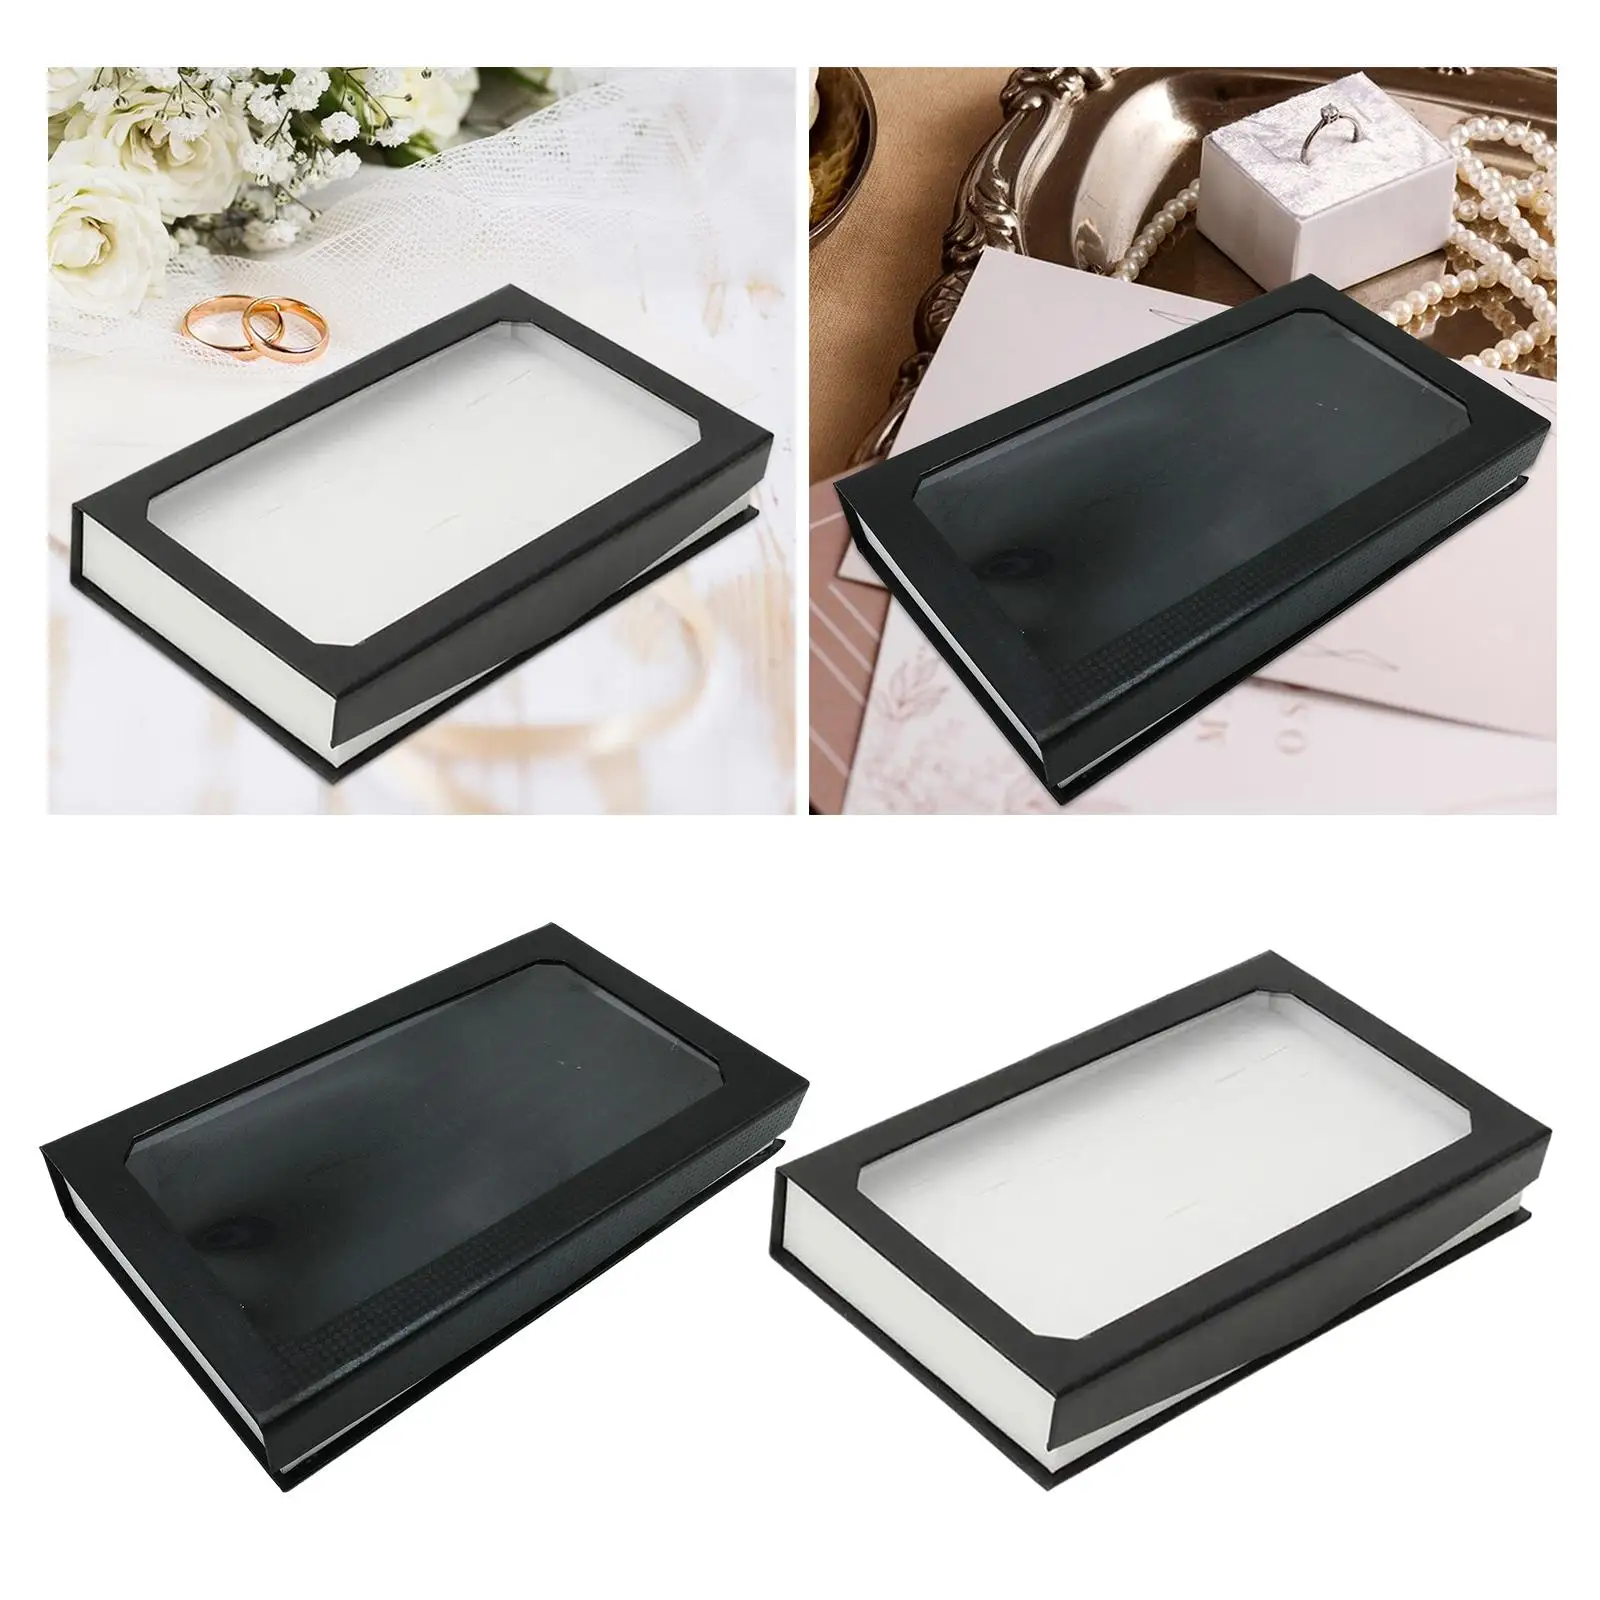 Rings Display Tray Dresser 72 Hole Store Display Portable Shop Jewelry Show Earring Holder Storage Box for Rings Studs Earrings